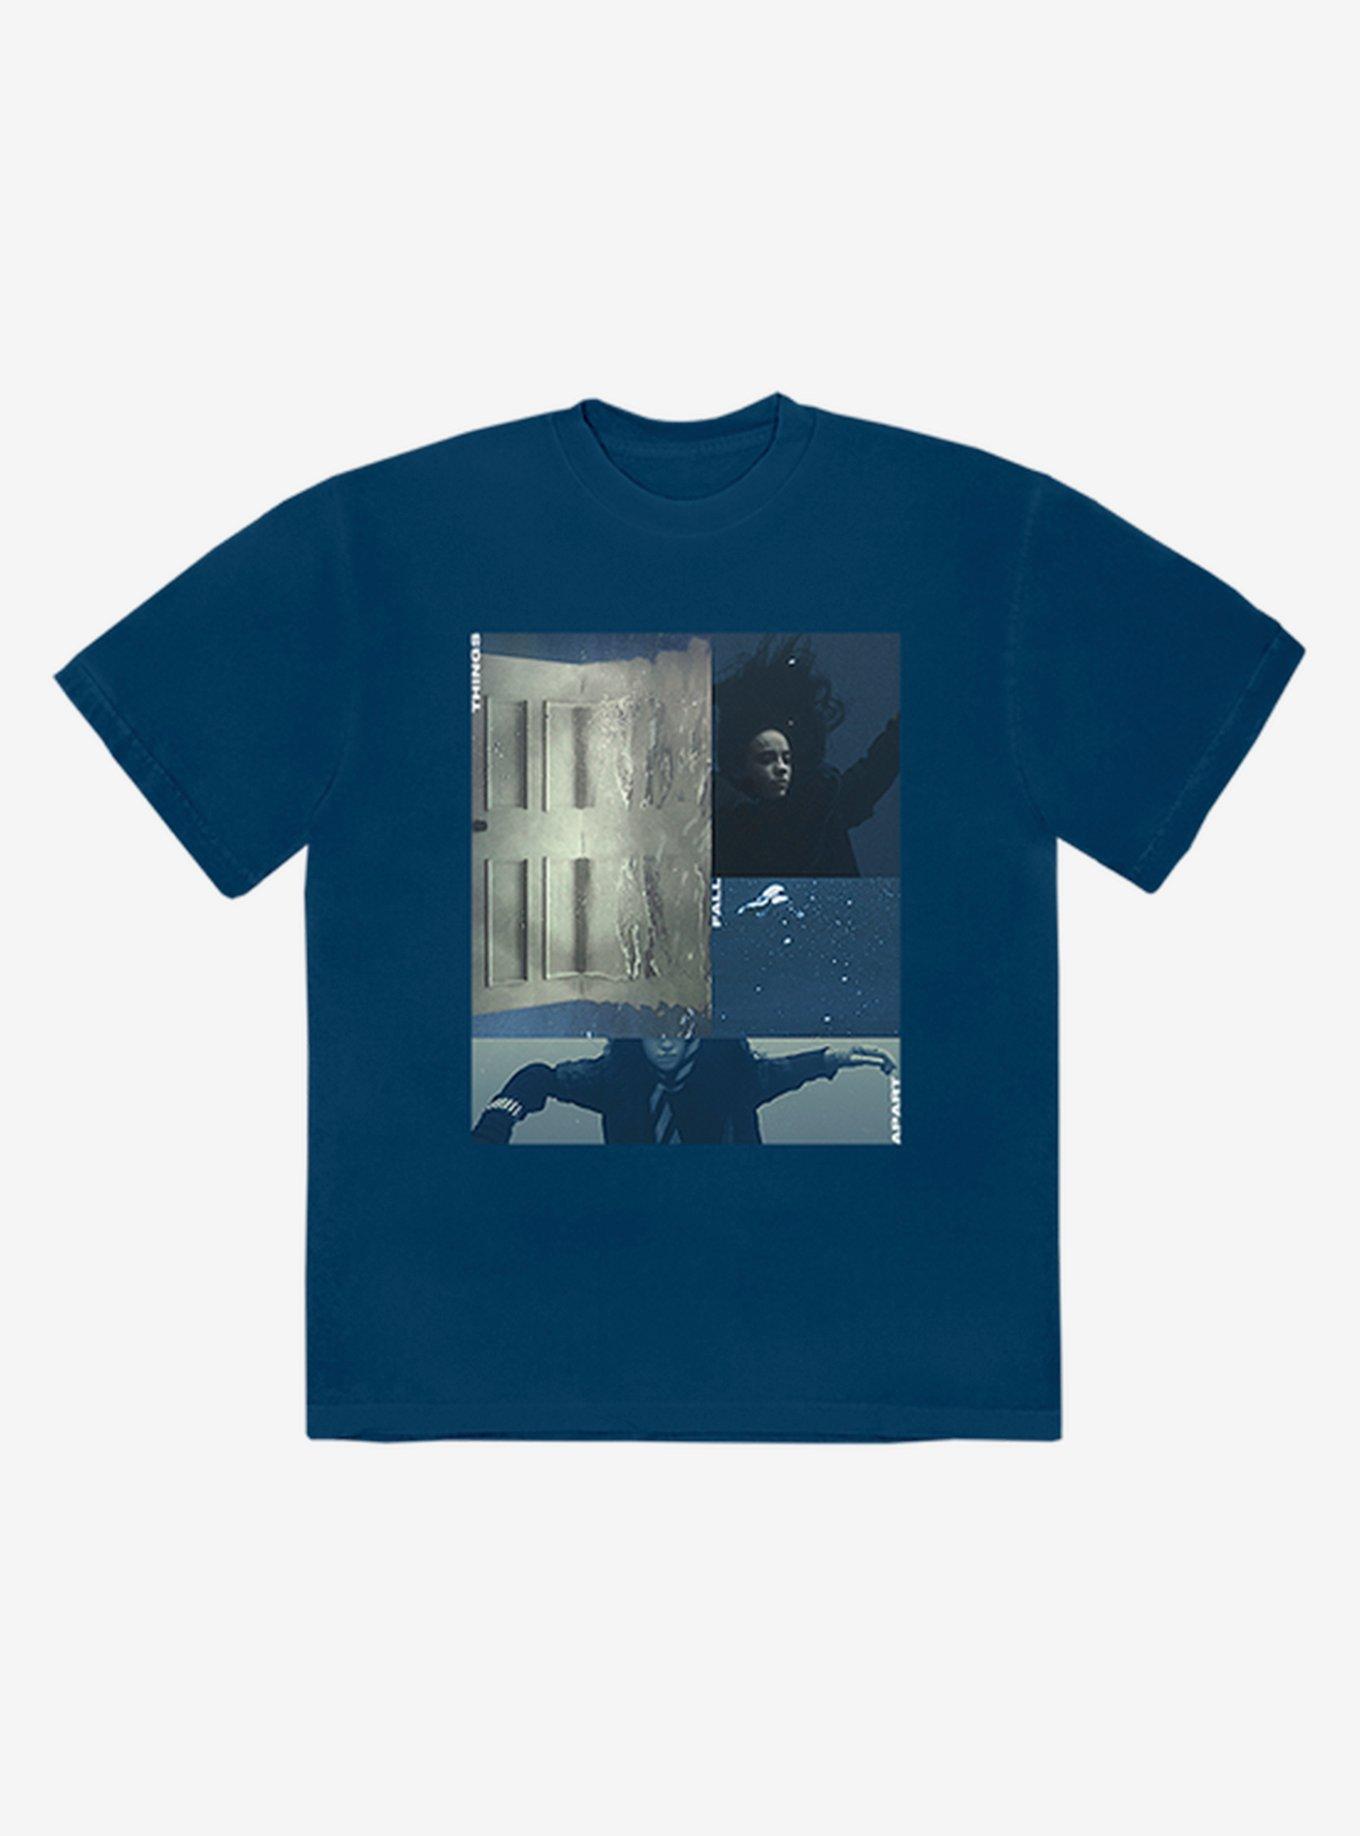 Billie Eilish Hit Me Hard And Soft Blue Two-Sided T-Shirt Hot Topic Exclusive, NAVY, hi-res